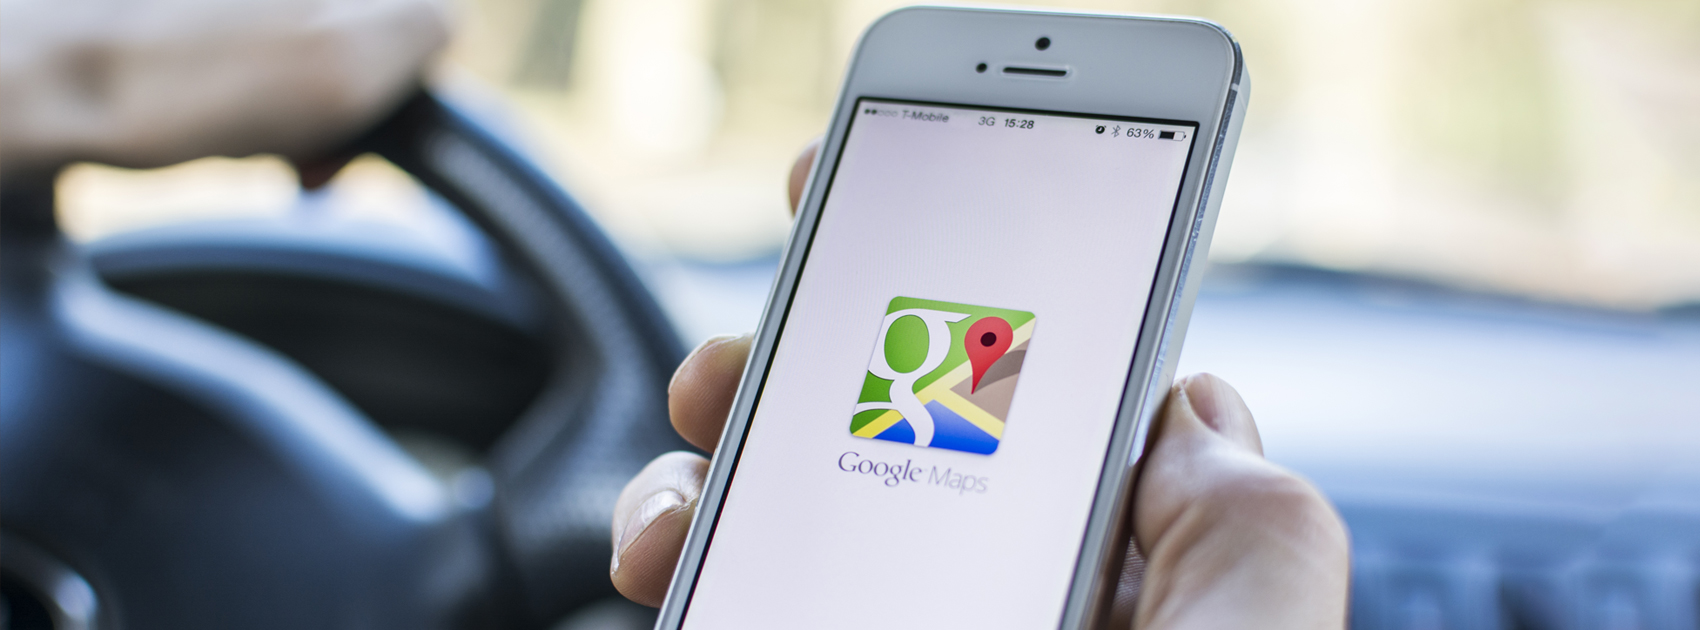 Google Maps To Test New Safety Feature For Cabs,Startup Stories,2019 Technology Latest News,Google Maps New Safety Feature,Cabs Google Maps,Google Maps New Feature For Cabs,Google Maps New Feature,Google Maps Safety Alert Feature,Google Maps Safety Feature For Taxi